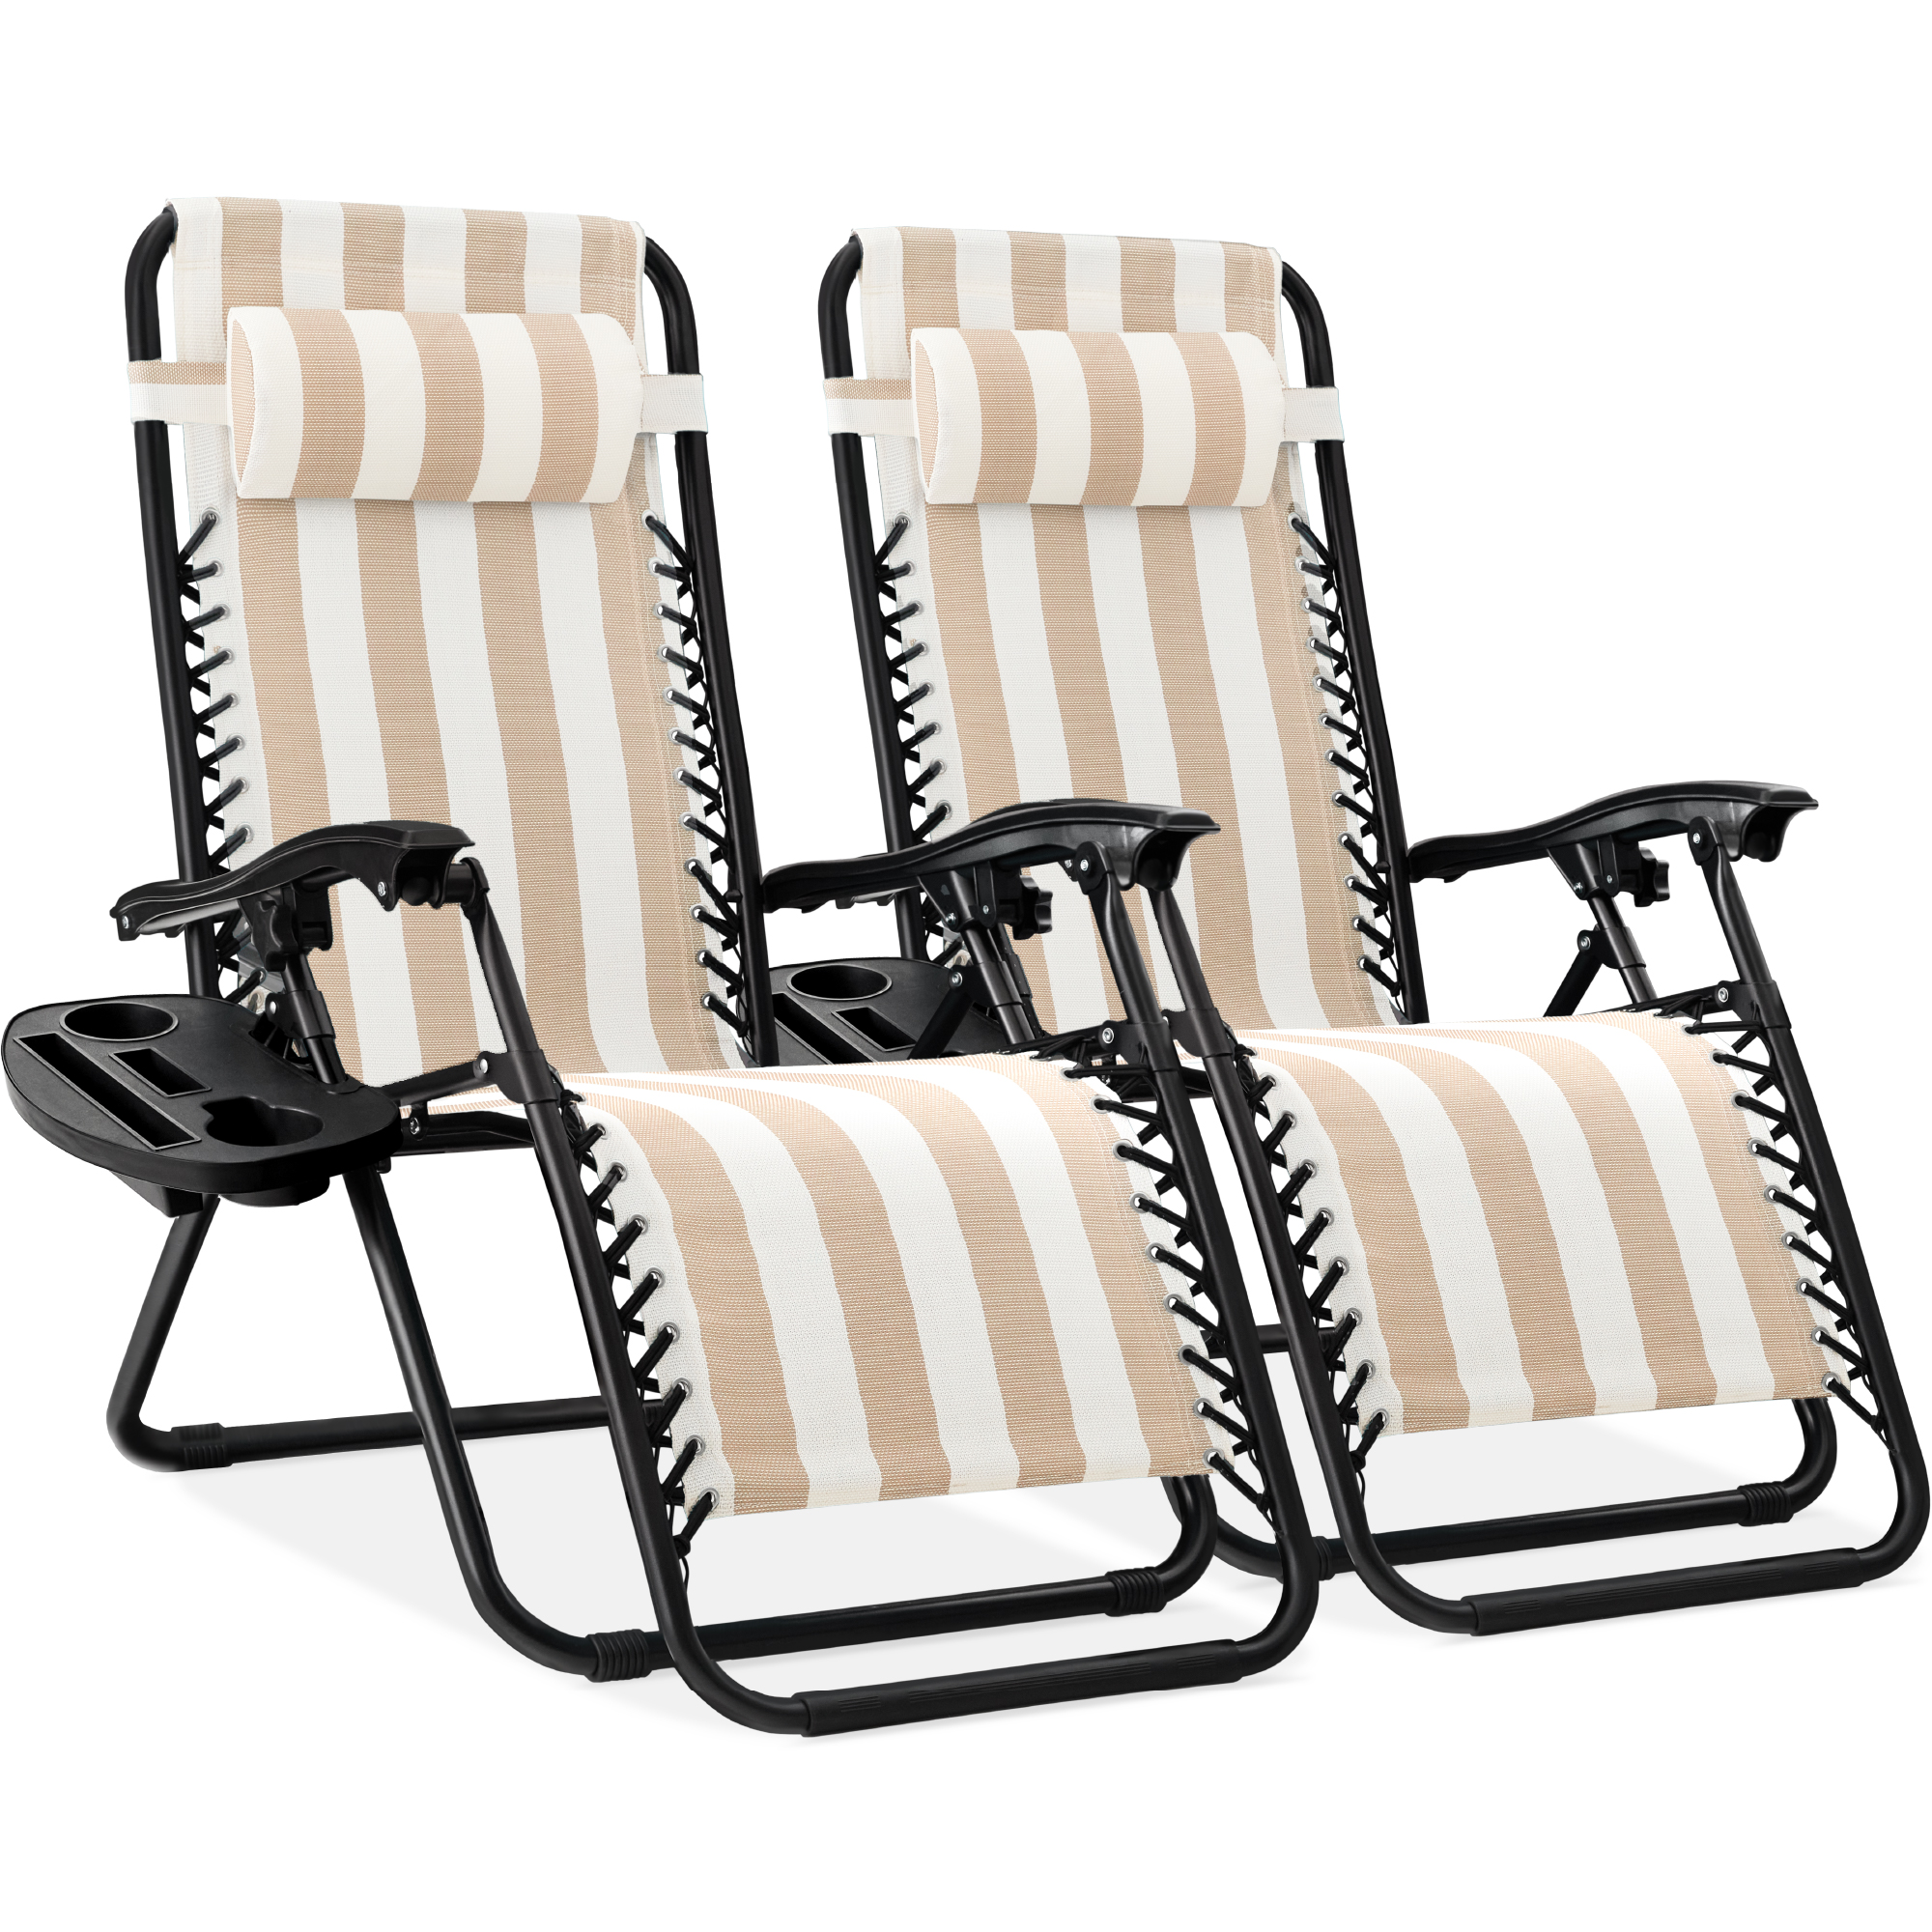 Best Choice Products Set of 2 Zero Gravity Lounge Chair Recliners for Patio, Pool w/ Cup Holder Tray - Tan Striped - image 1 of 8